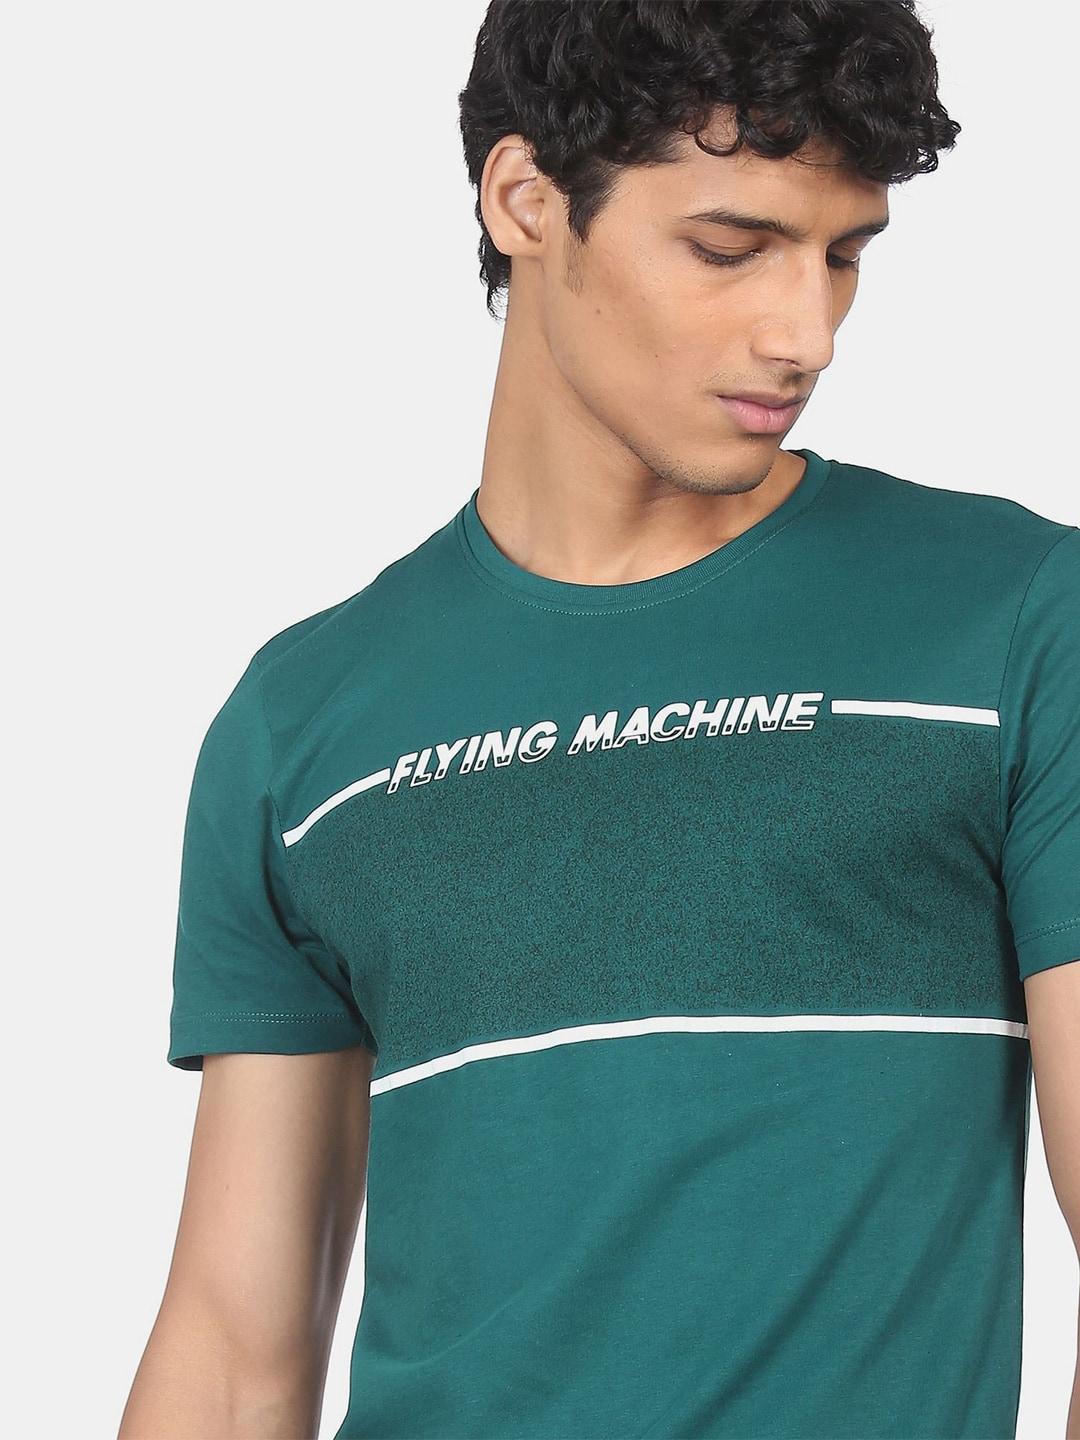 Flying Machine Men Teal Green Typography Printed Pure Cotton T-shirt